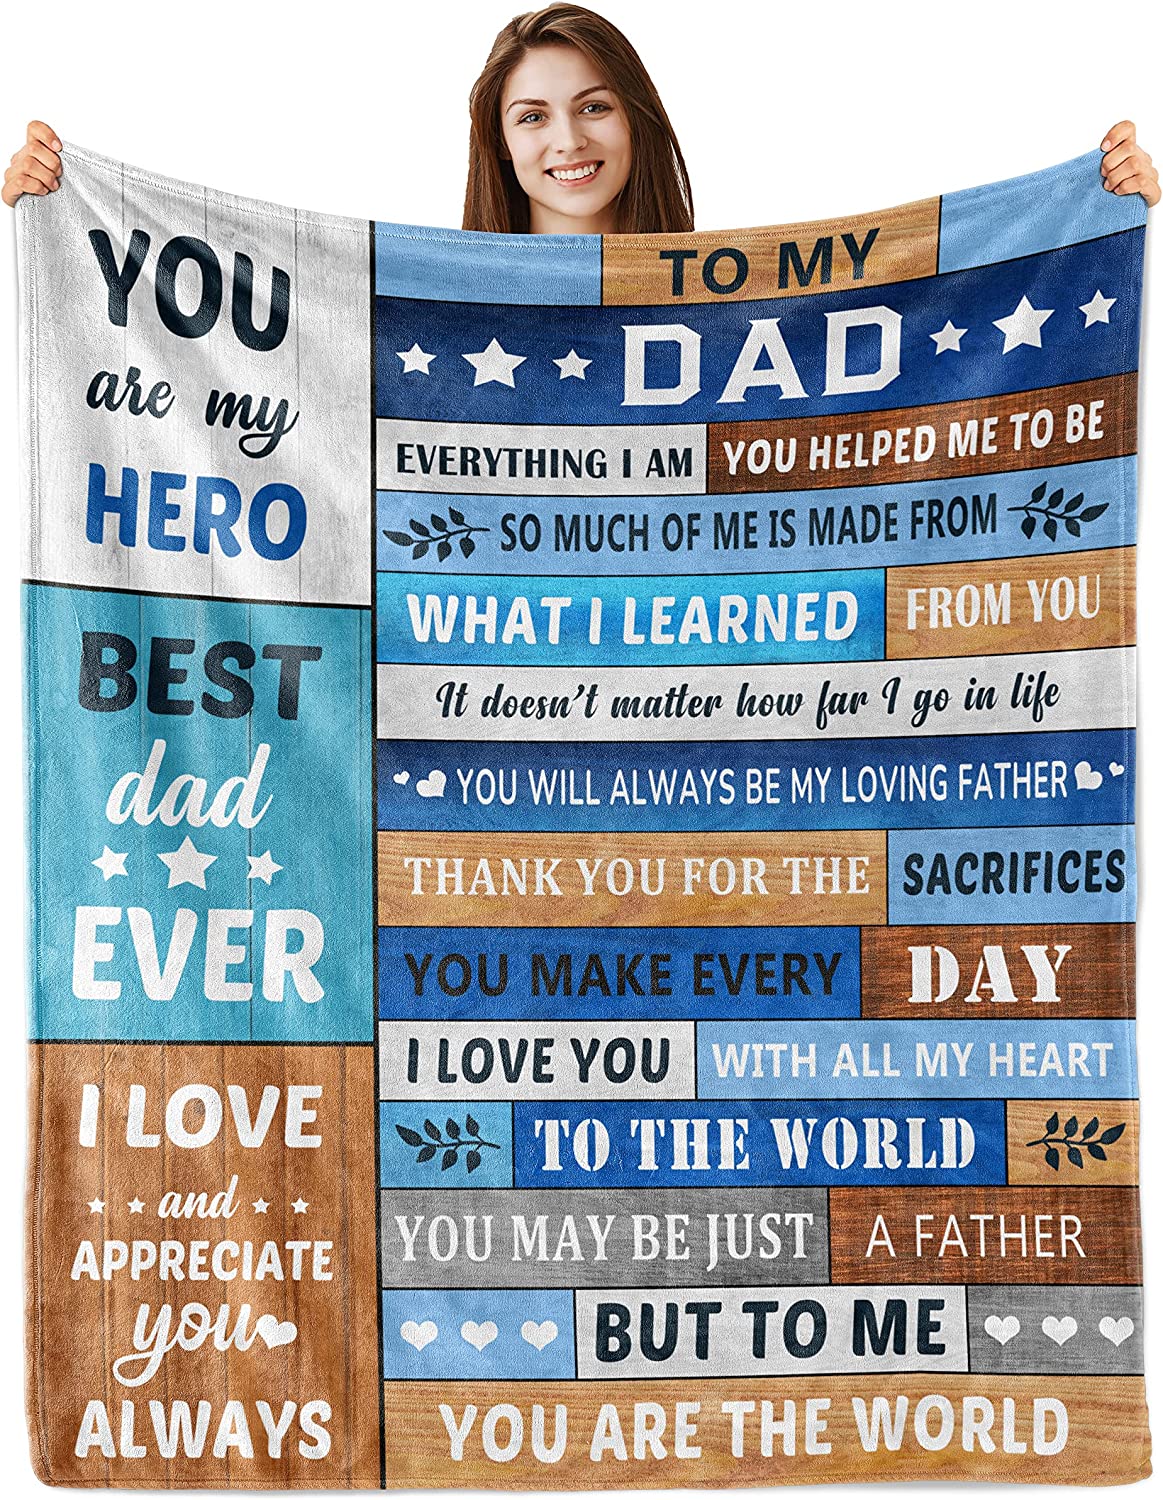 Gifts for Dad,Fathers Birthday Gifts from Daughter Son,to My Dad  Blanket,Dad Birthday Gift Ideas,Dad Gifts,Birthday Gifts for Dad,Gifts for  Dad Who Wants Nothing,Dad Gifts from Daughter Son 